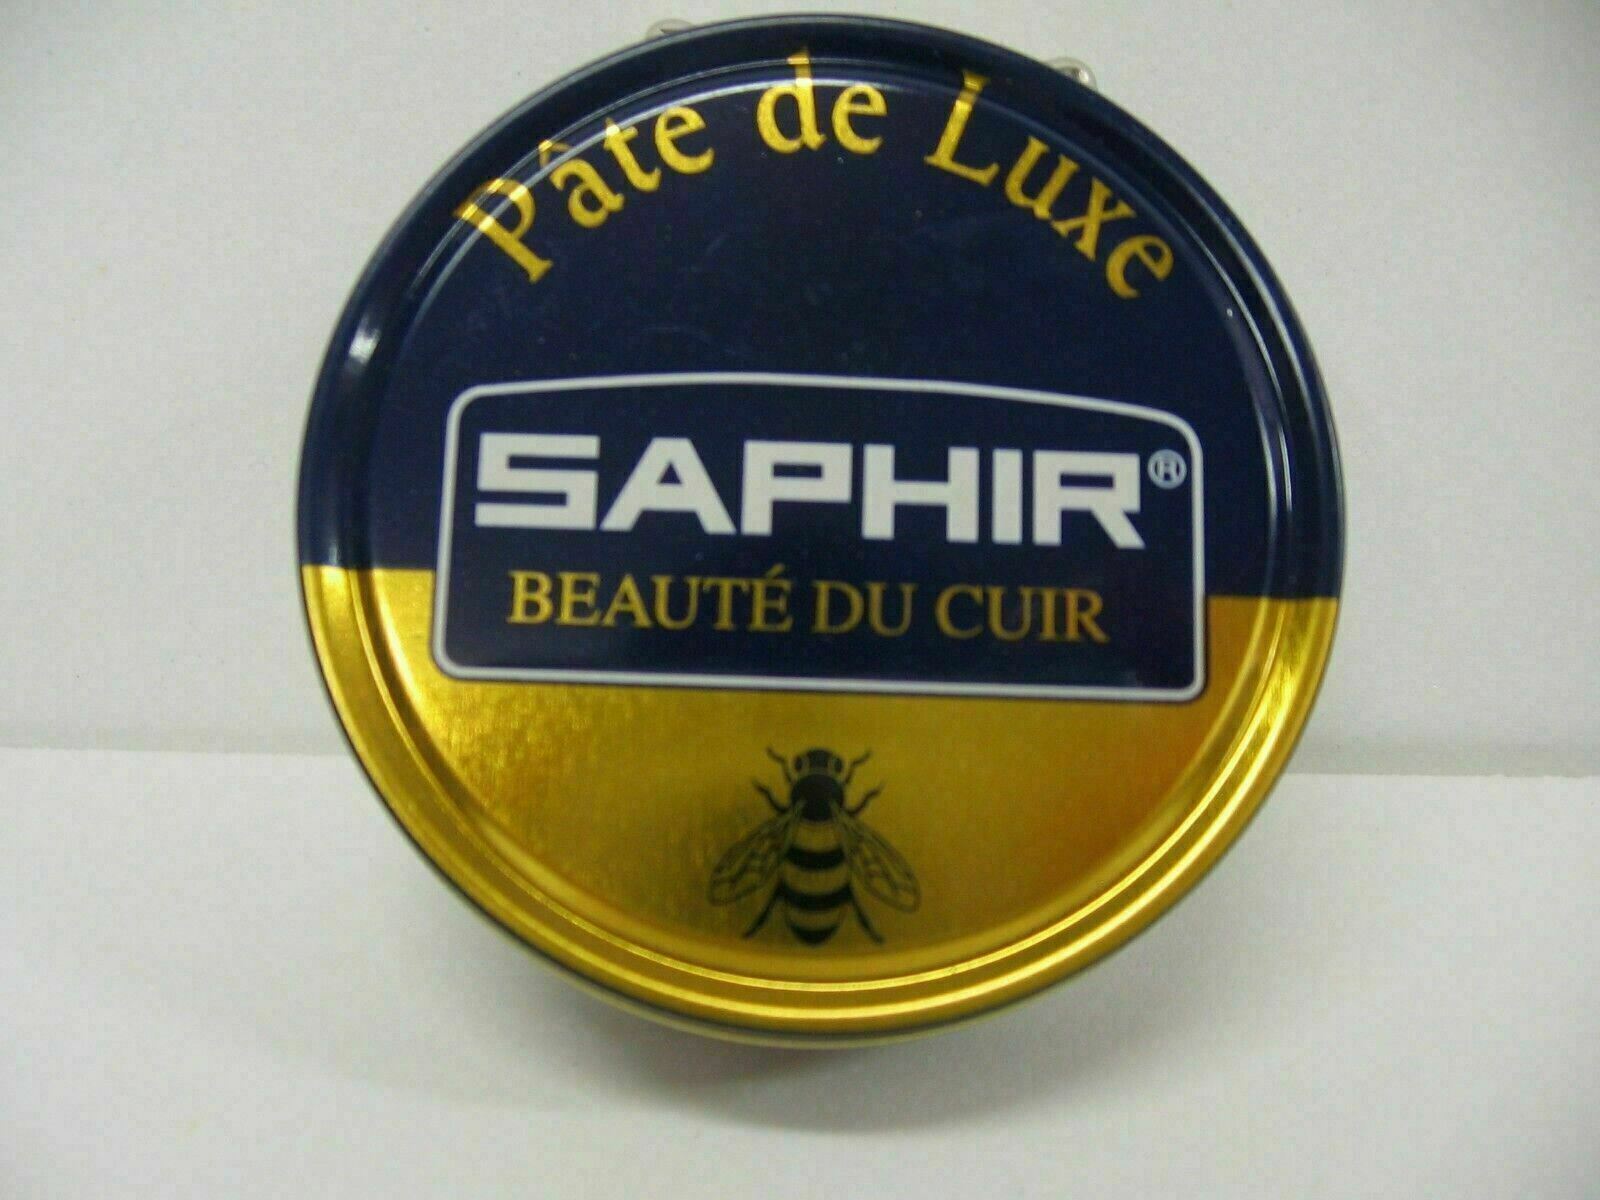 Saphir Shoe Polish Wax Pate De Luxe 50ml Made in France ALL COLORS